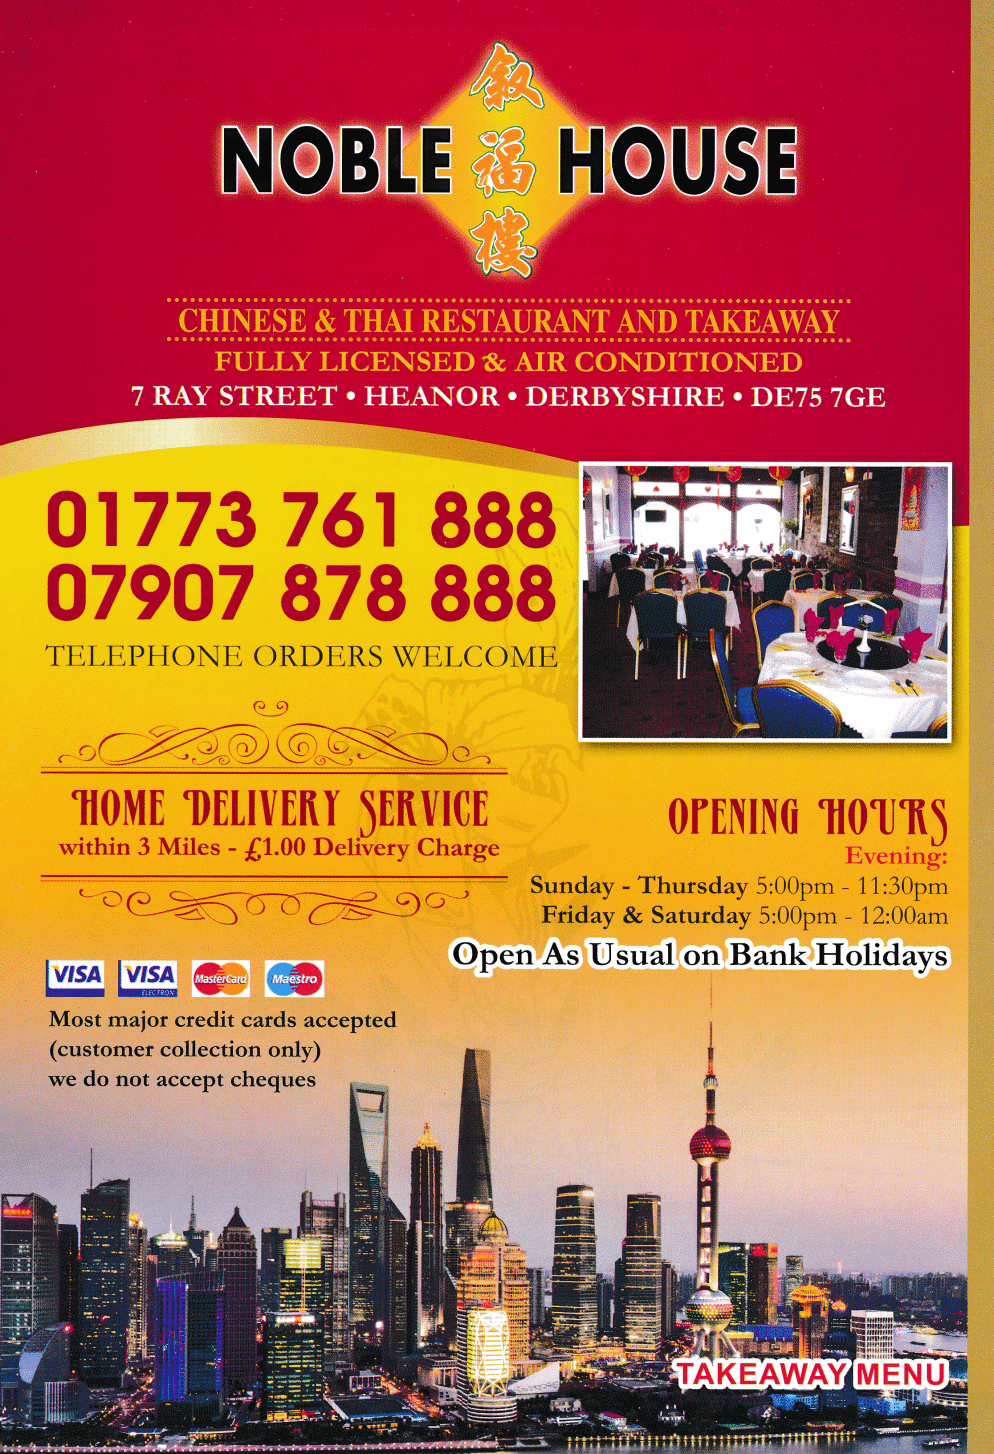 Takeaway menu for Noble House Chinese and Thai restaurant in Heanor